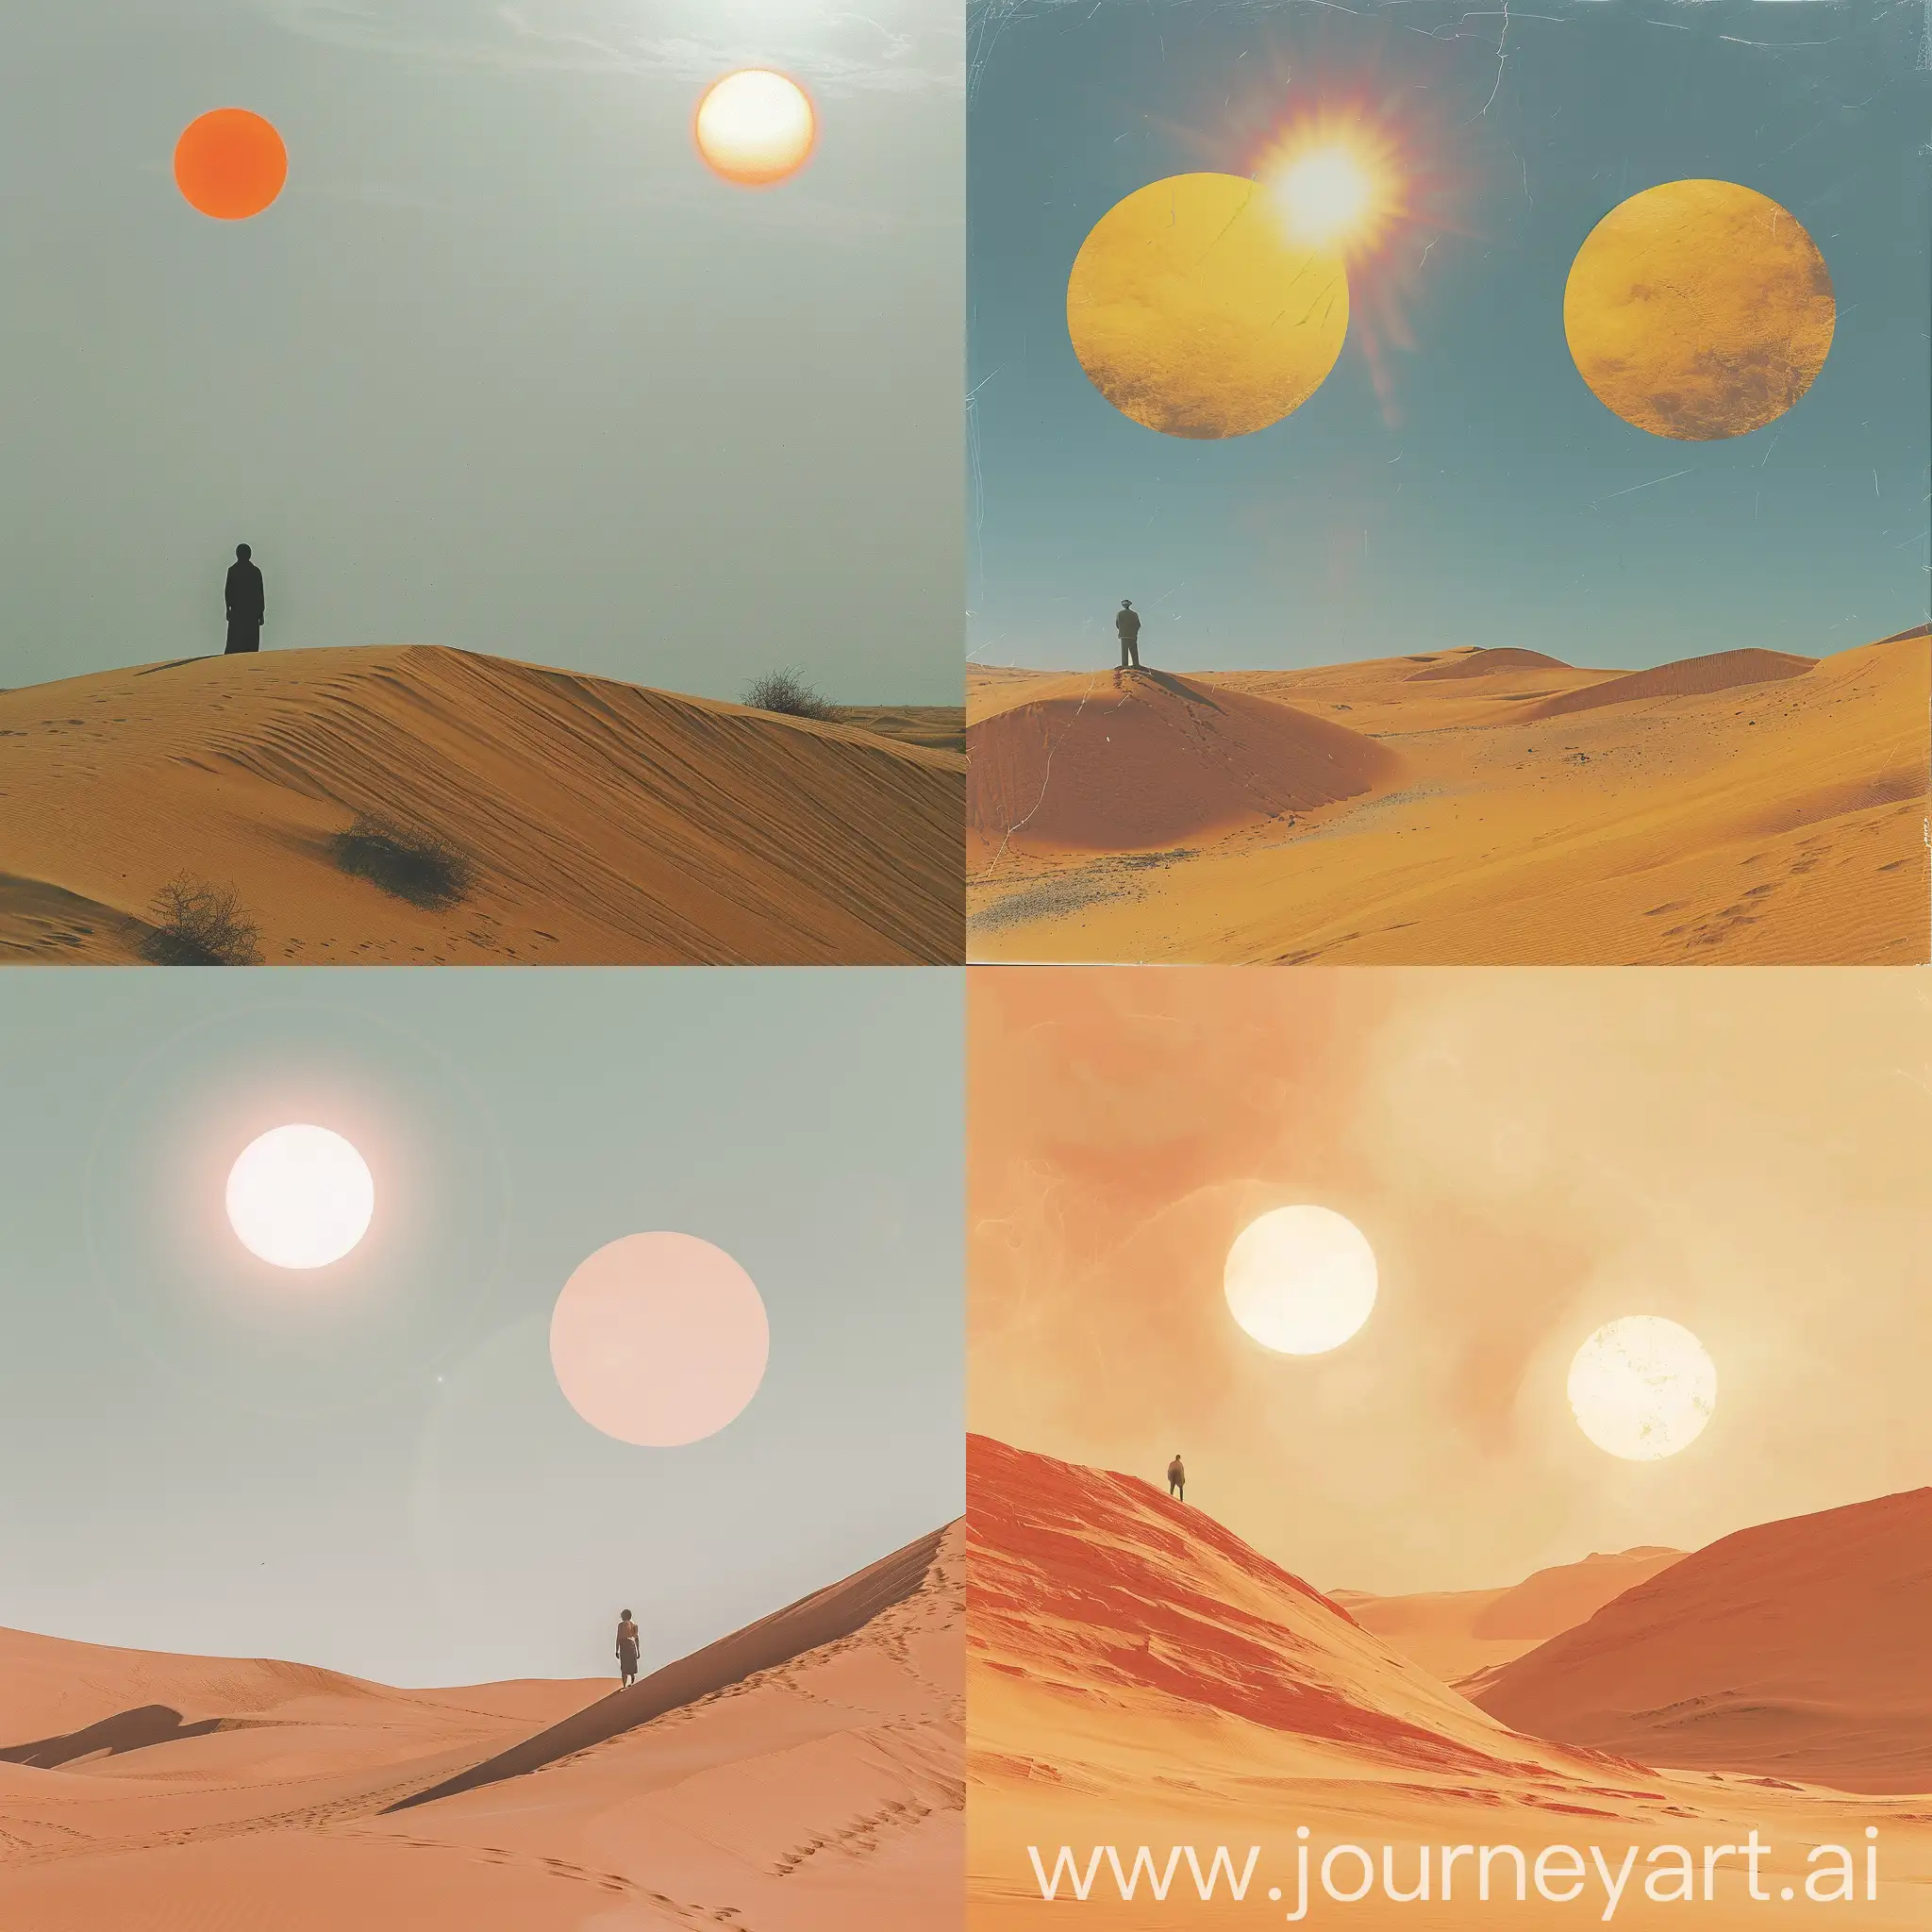 desert dunes, two suns, hot day, one man on a side